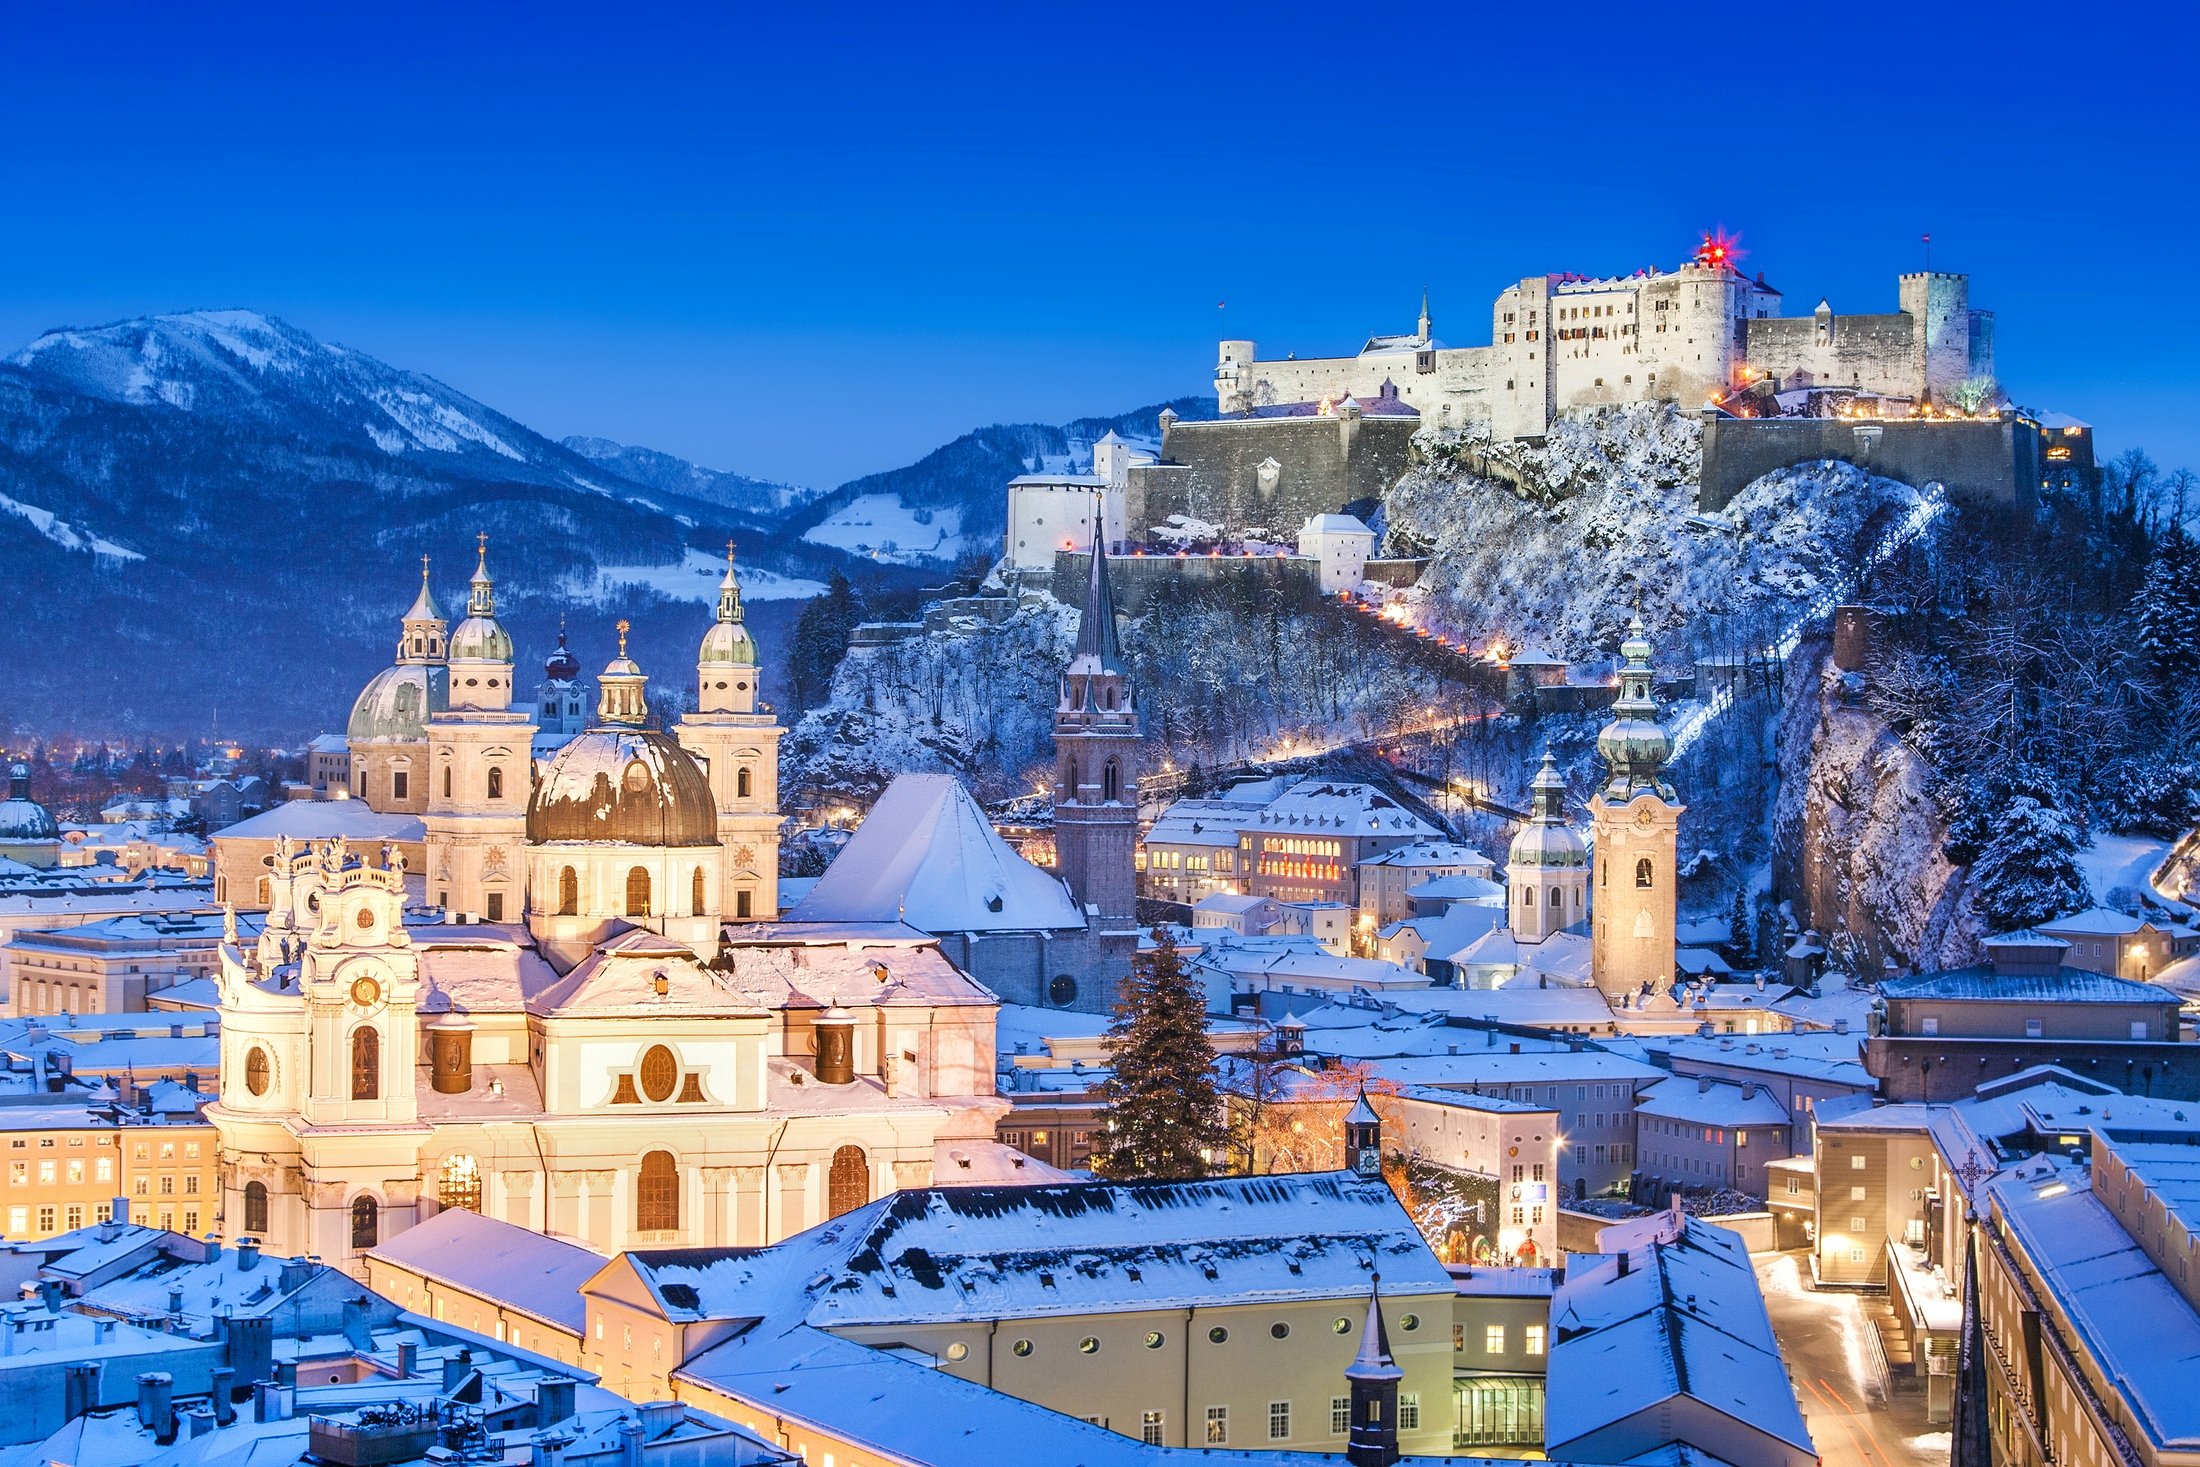 The city of Salzburg and the Hohensalzburg Fortress during winter, in Salzburg, Austria. (Shutterstock Photo)